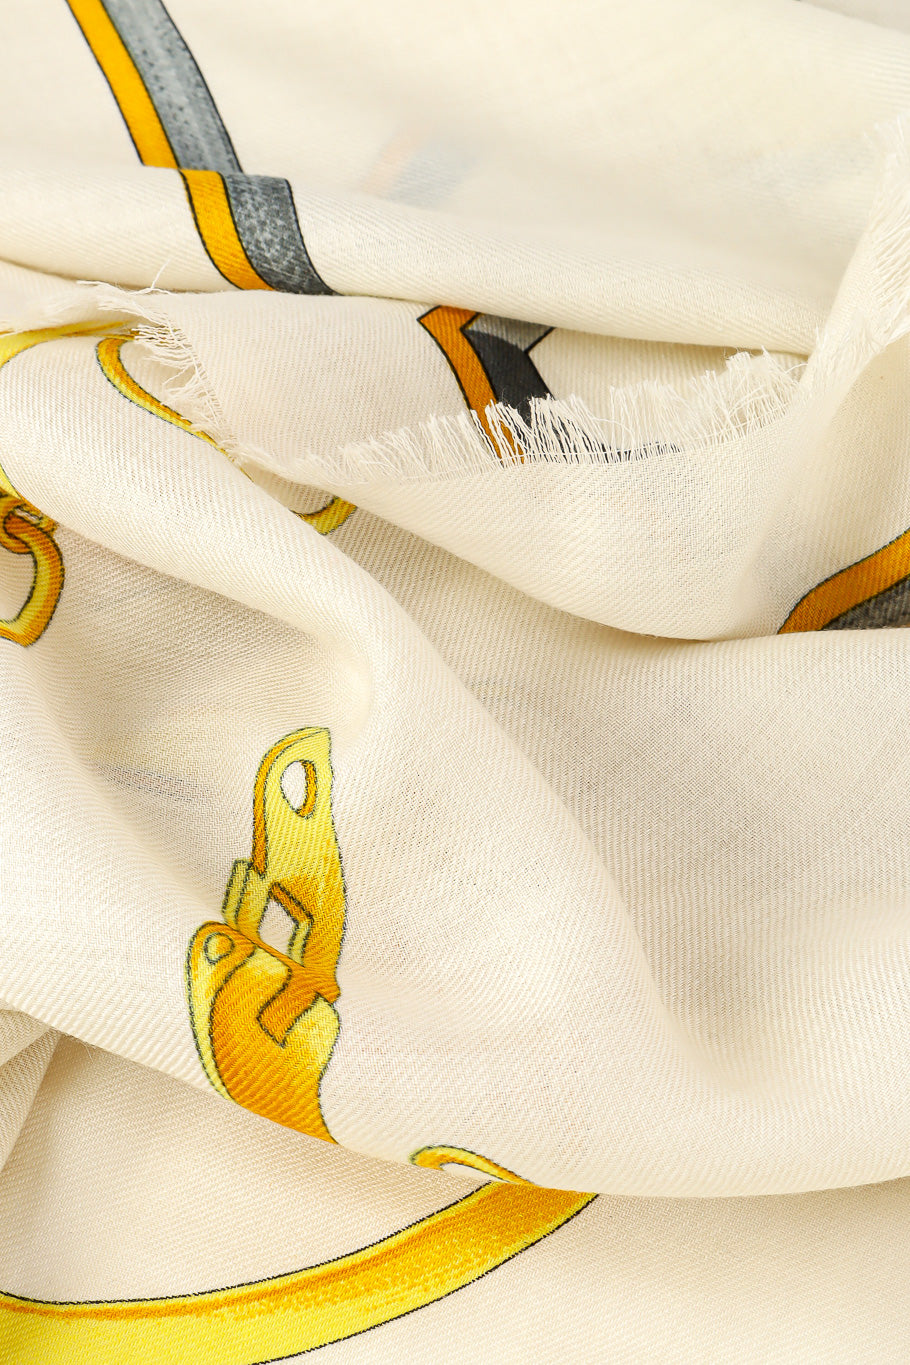 Large horsebit graphic scarf by Gucci photo of fabric details. @recessla